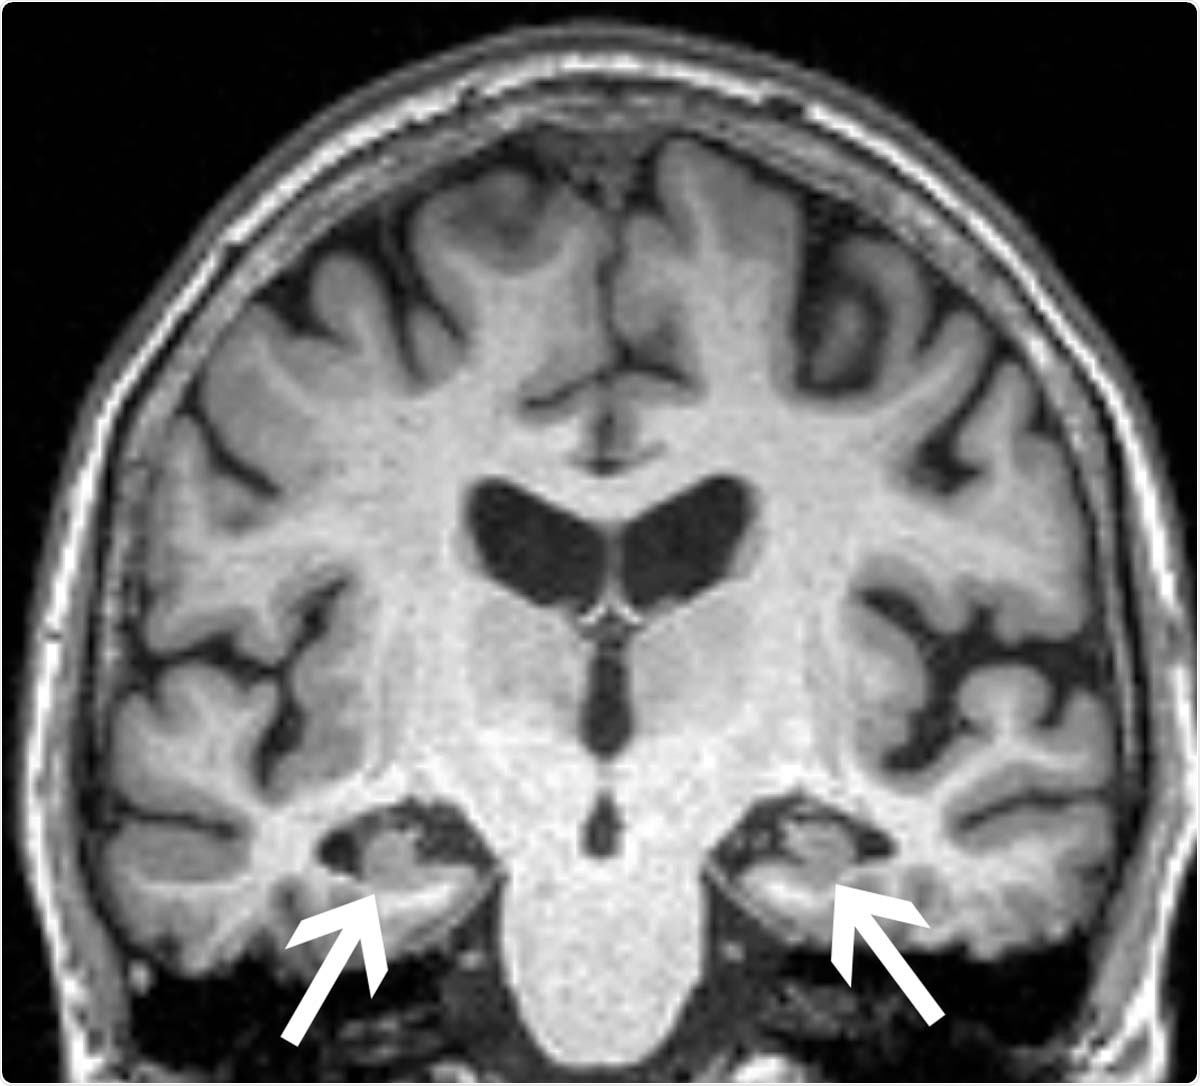 Brain MRI of a 72-year-old woman shows loss of volume of the hippocampus (arrows). The patient had all three characteristics, volume loss of the hippocampi, APOE4, and anxiety, found in the study to be associated with progression from mild cognitive impairment to dementia.